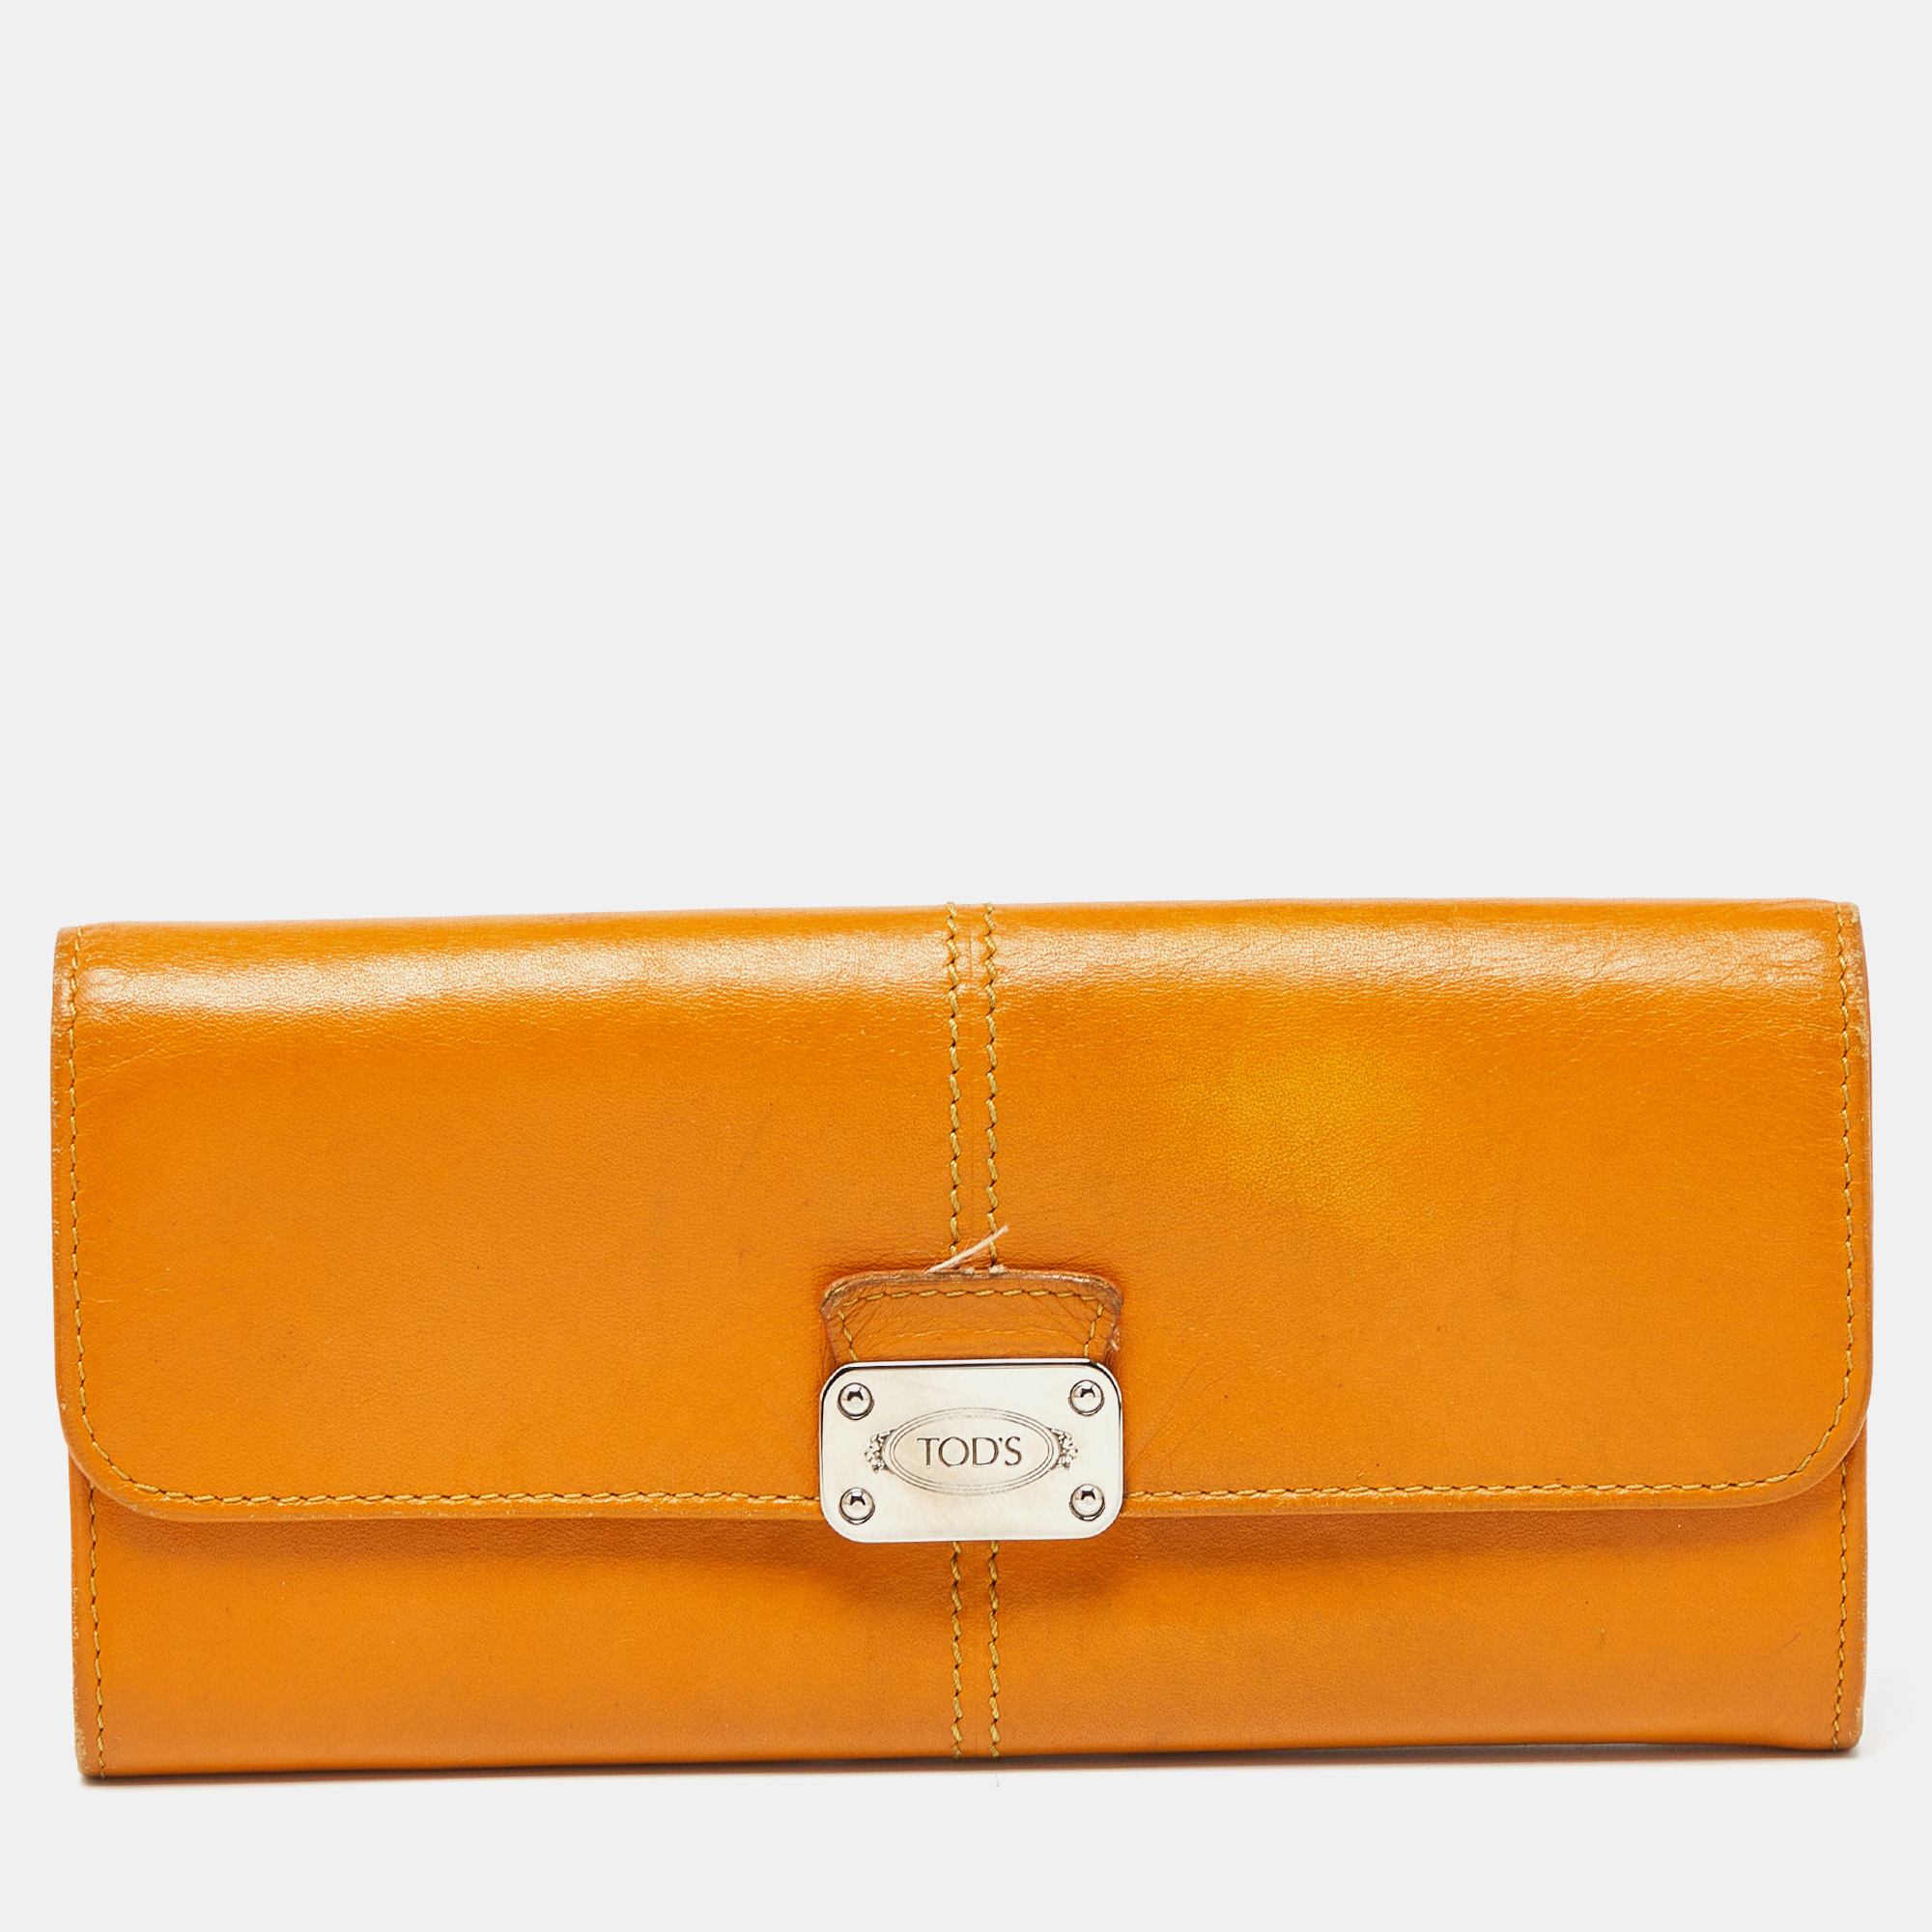 Tod's mustard leather plaque logo continental flap wallet